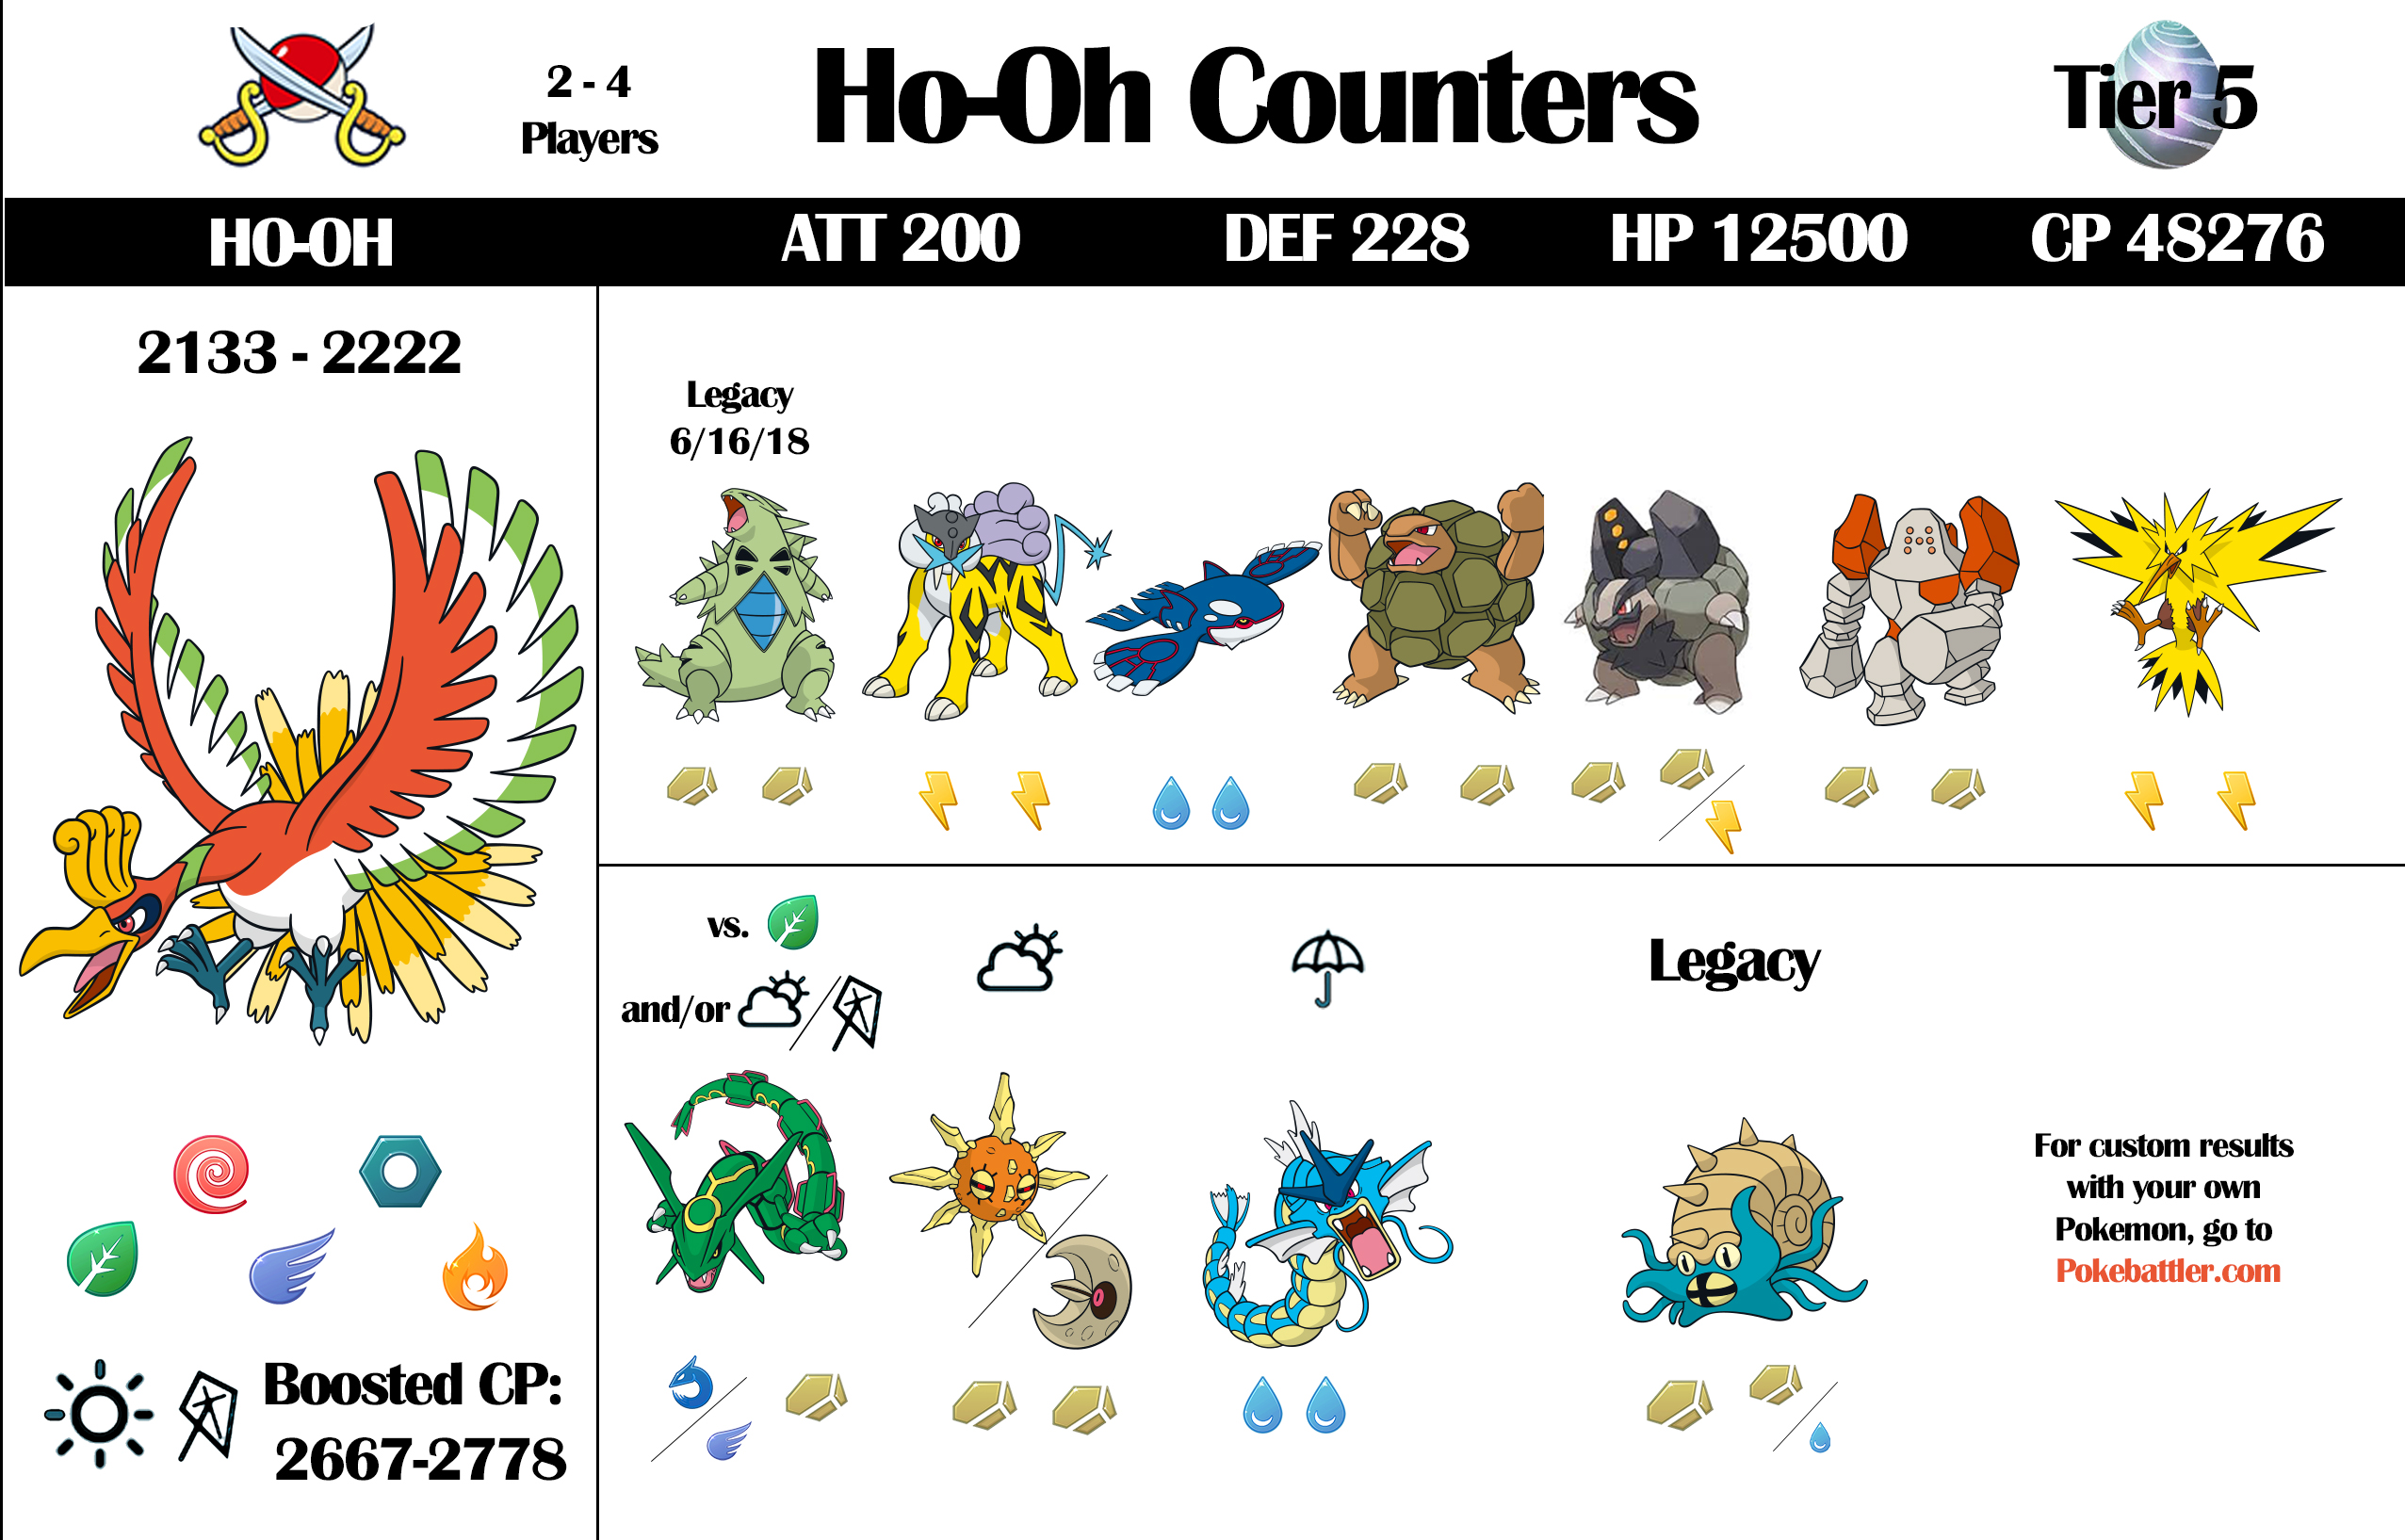 Ho-Oh Counters Raid and Infographic Updated 8/24/18 | Pokebattler